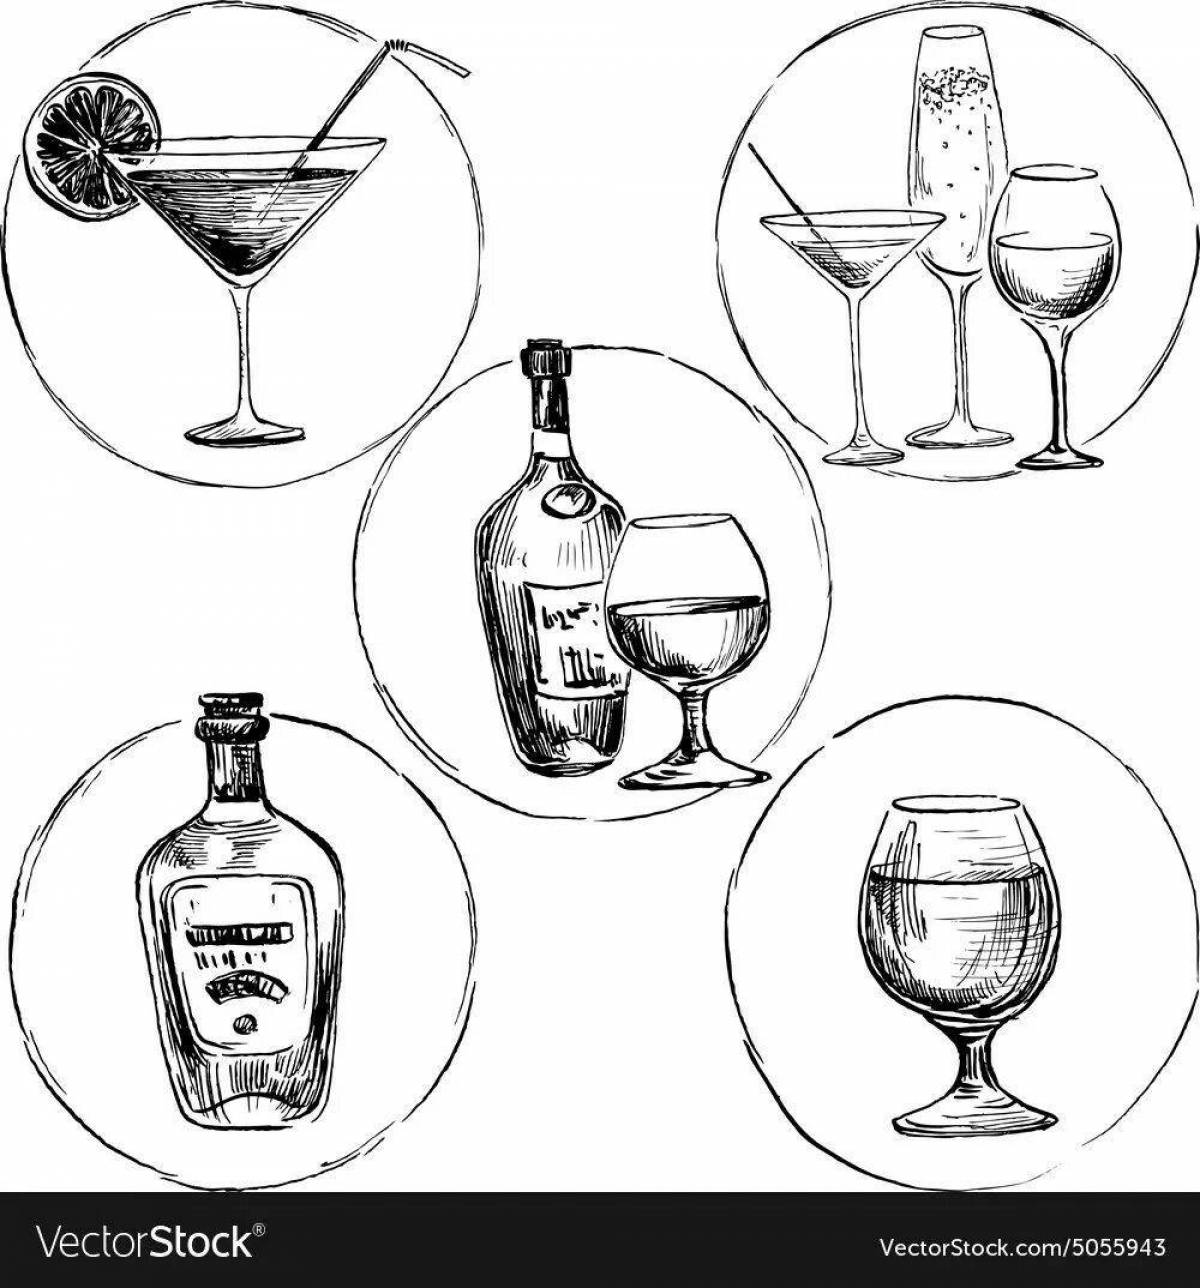 Playful alcohol coloring page